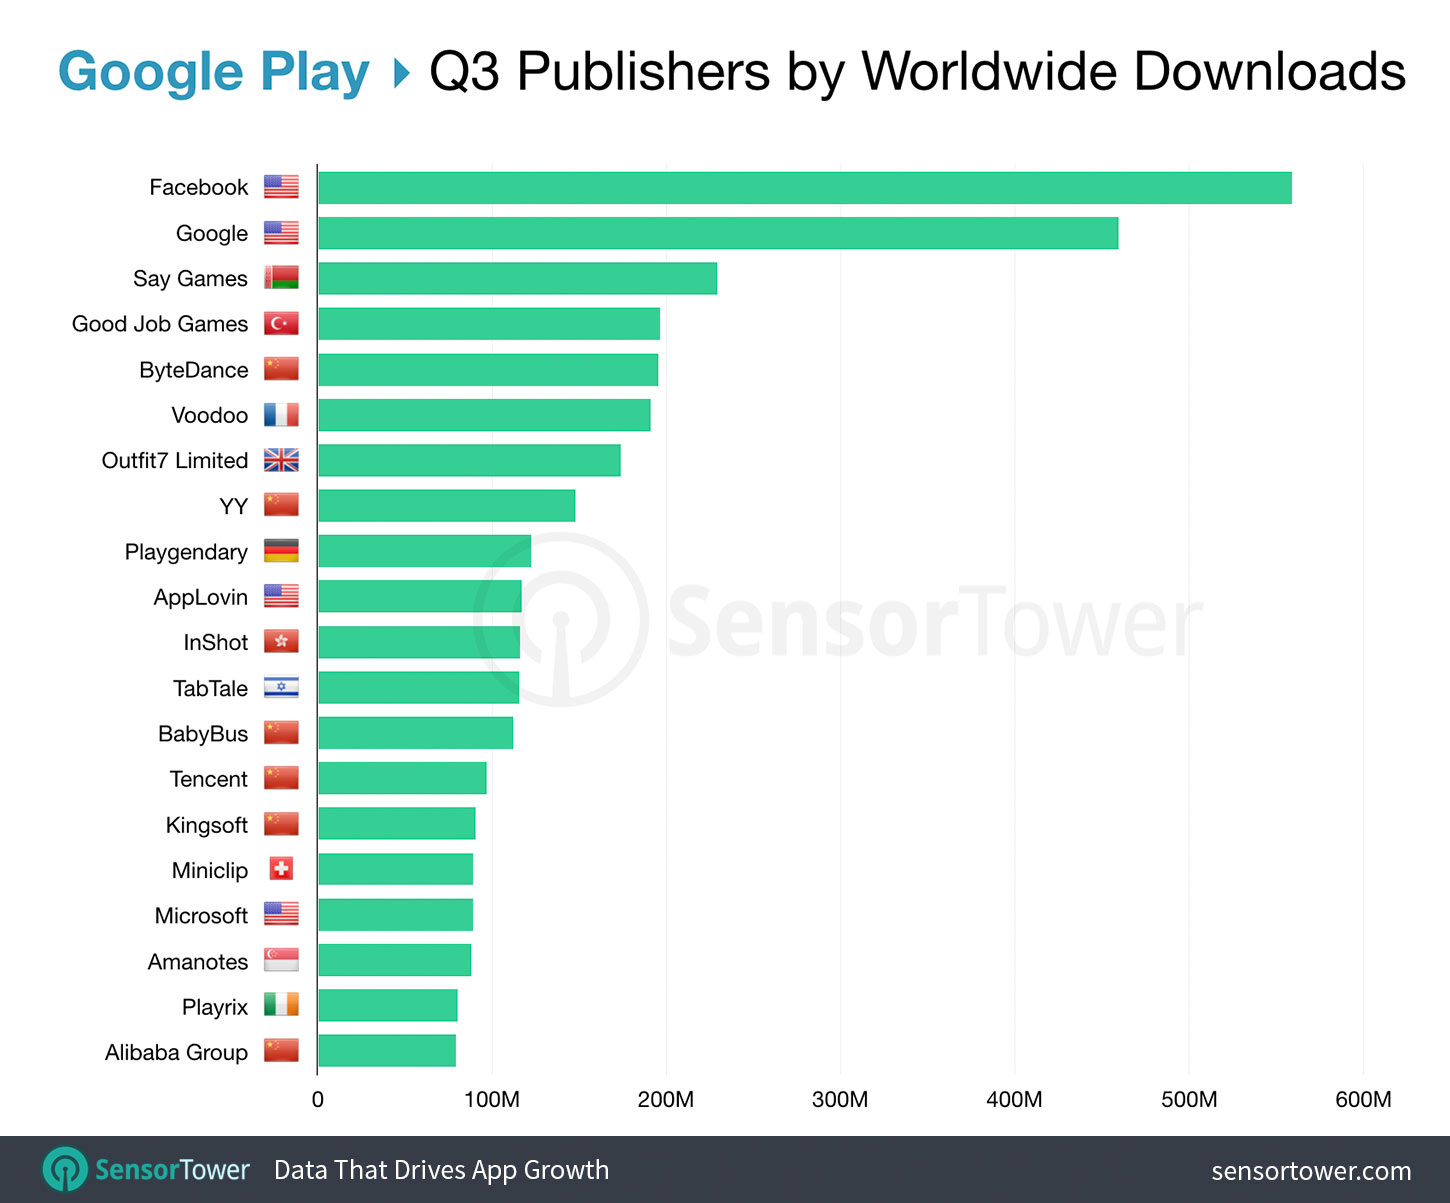 Top Google Play Mobile Publishers Worldwide for Q3 2019